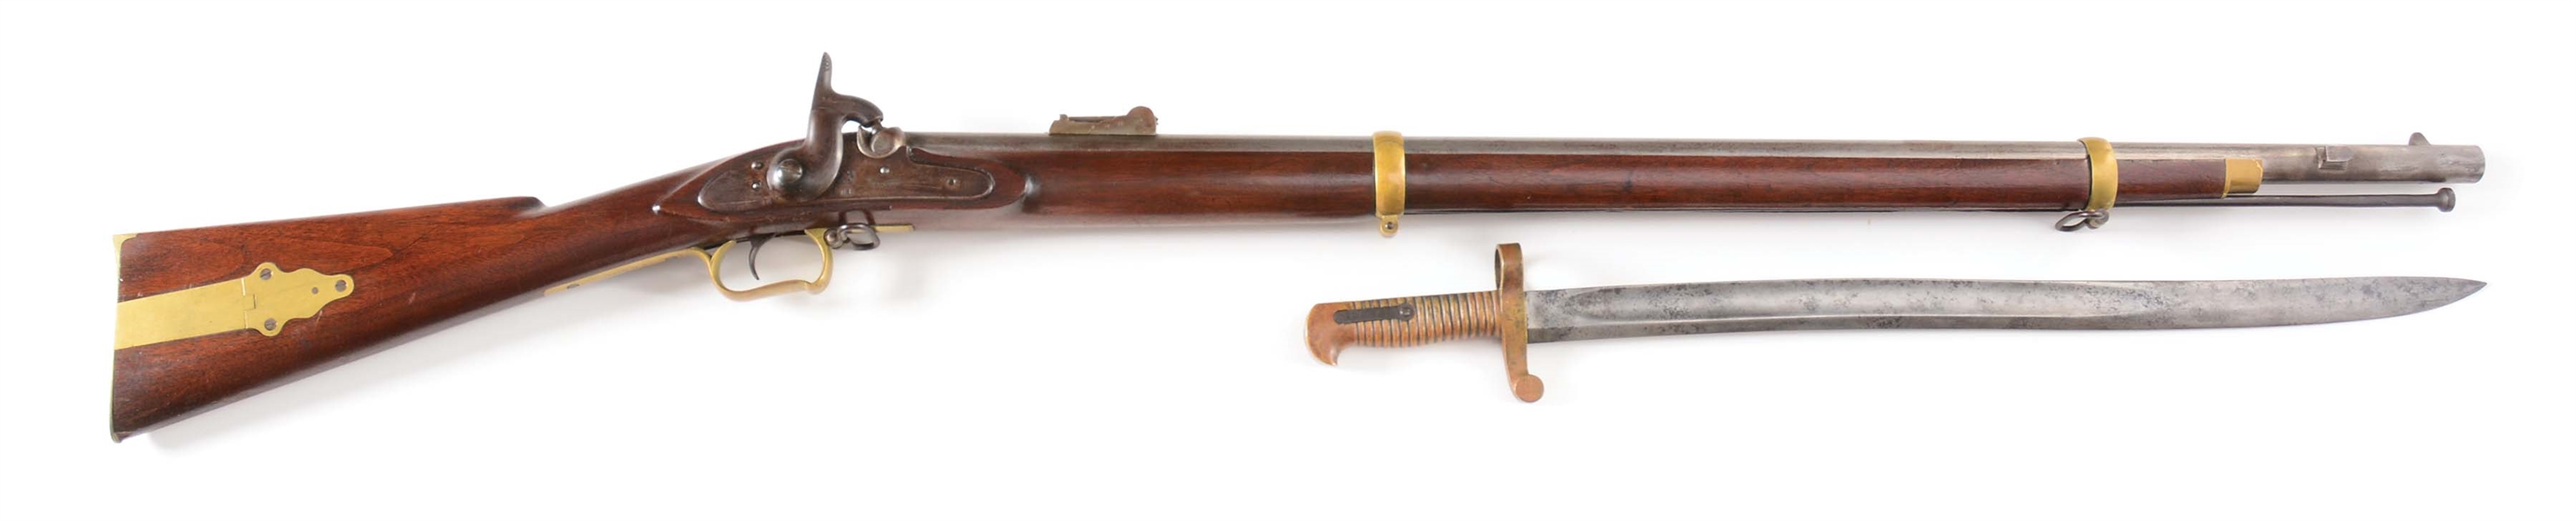 (A) P.S. JUSTICE RIFLED MUSKET WITH SABER BAYONET.